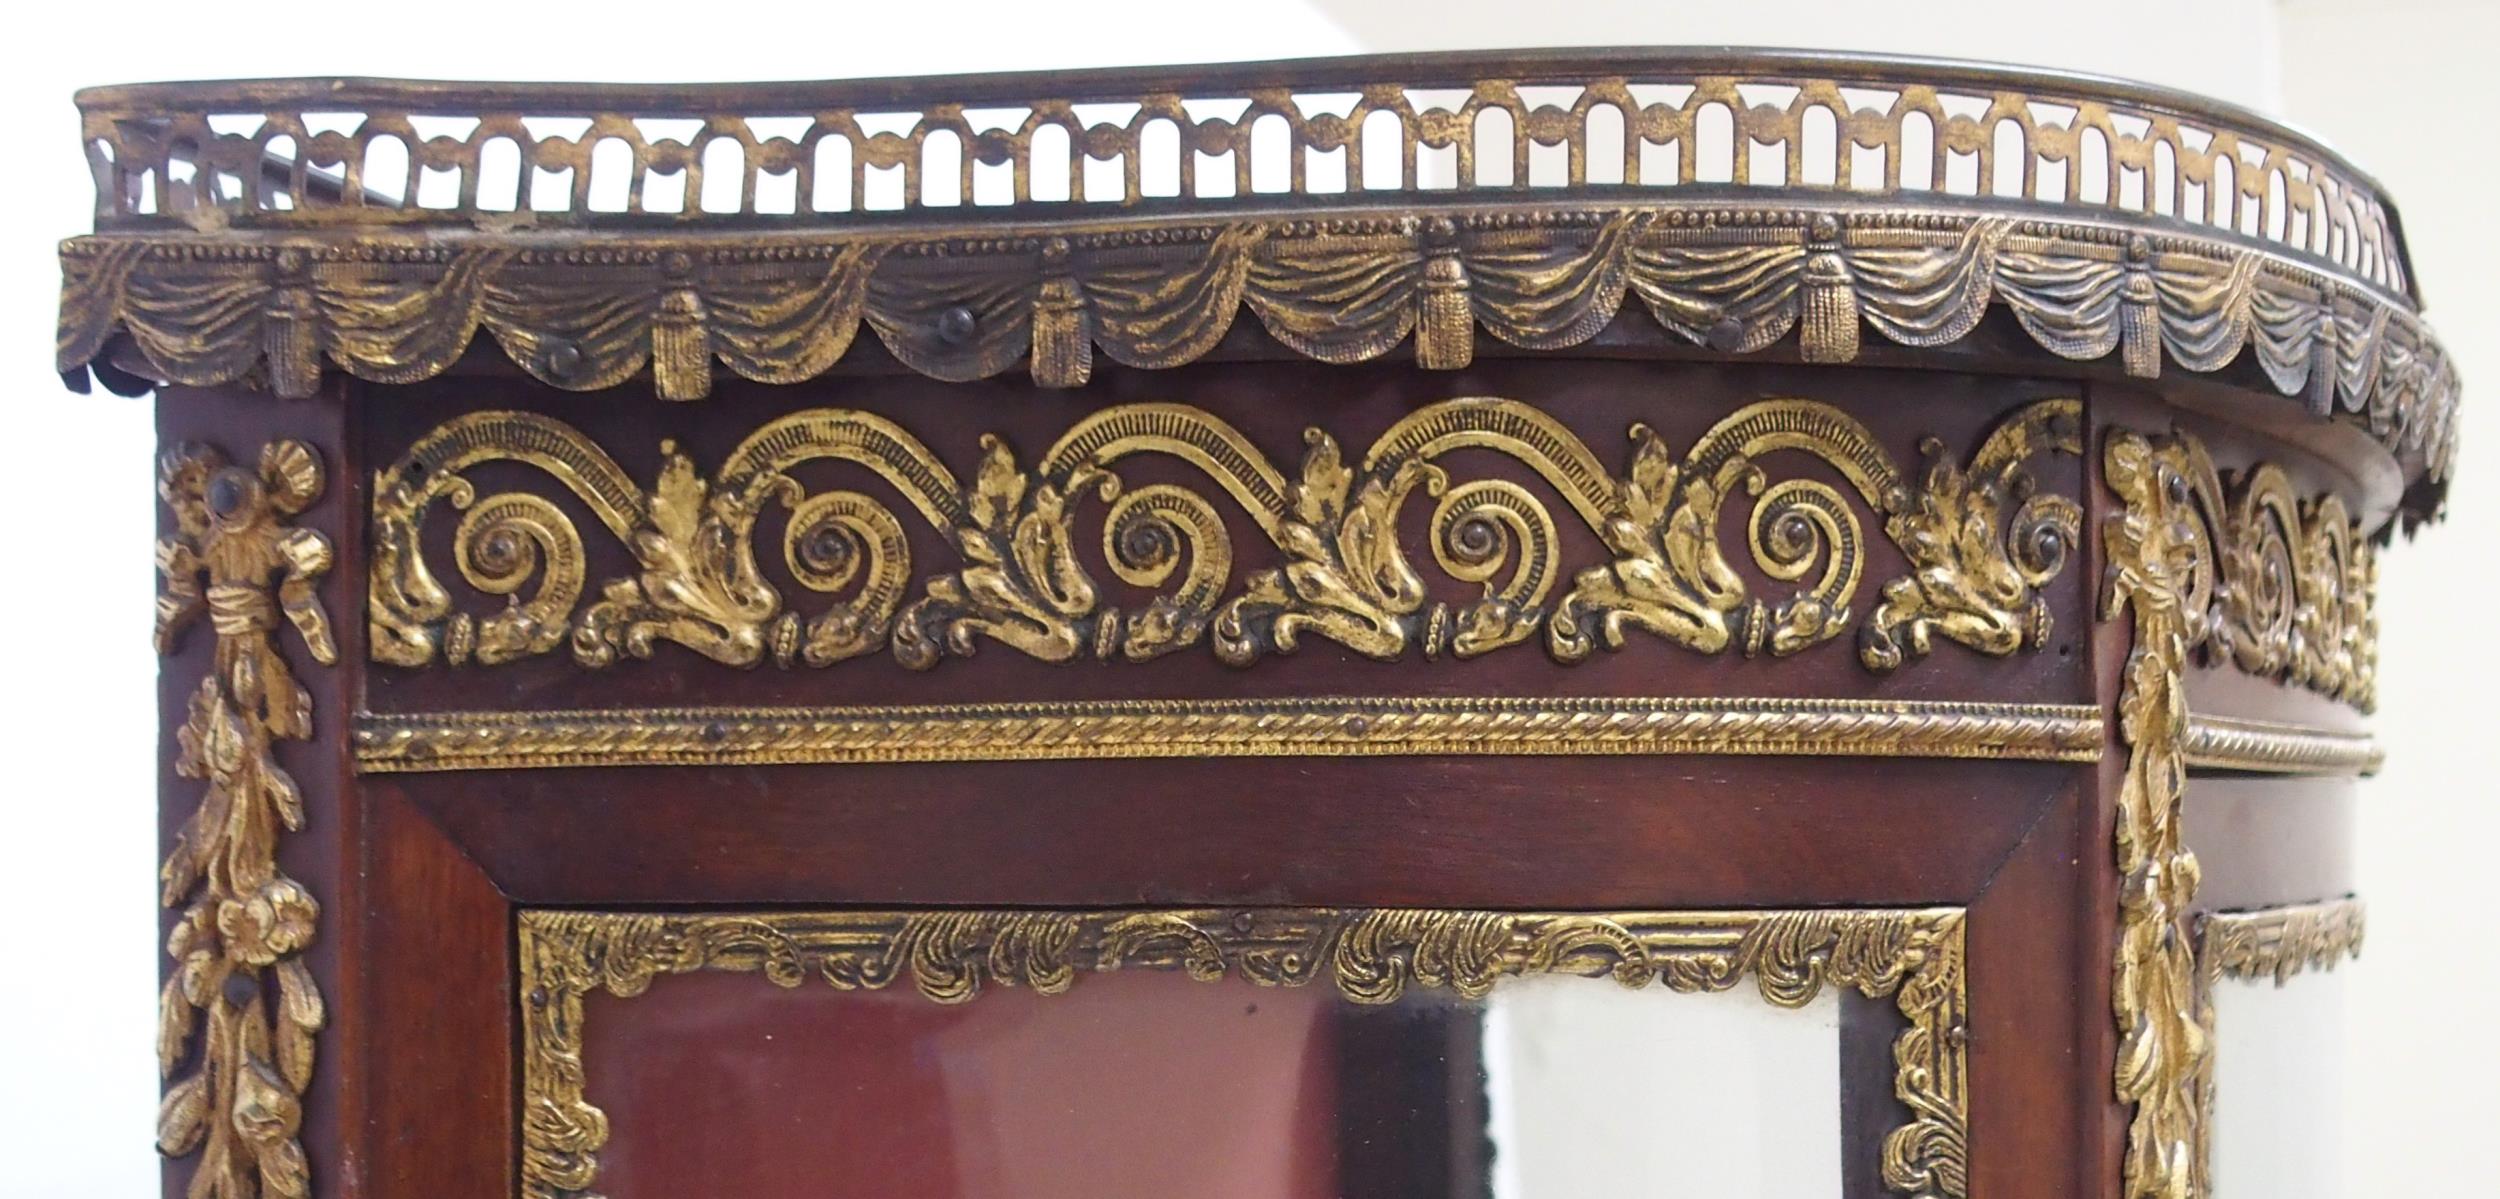 AN EARLY 20TH CENTURY LOUIS XV STYLE BRASS ORMOLU MOUNTED VITRINE DISPLAY CABINET  with galleried - Image 5 of 10